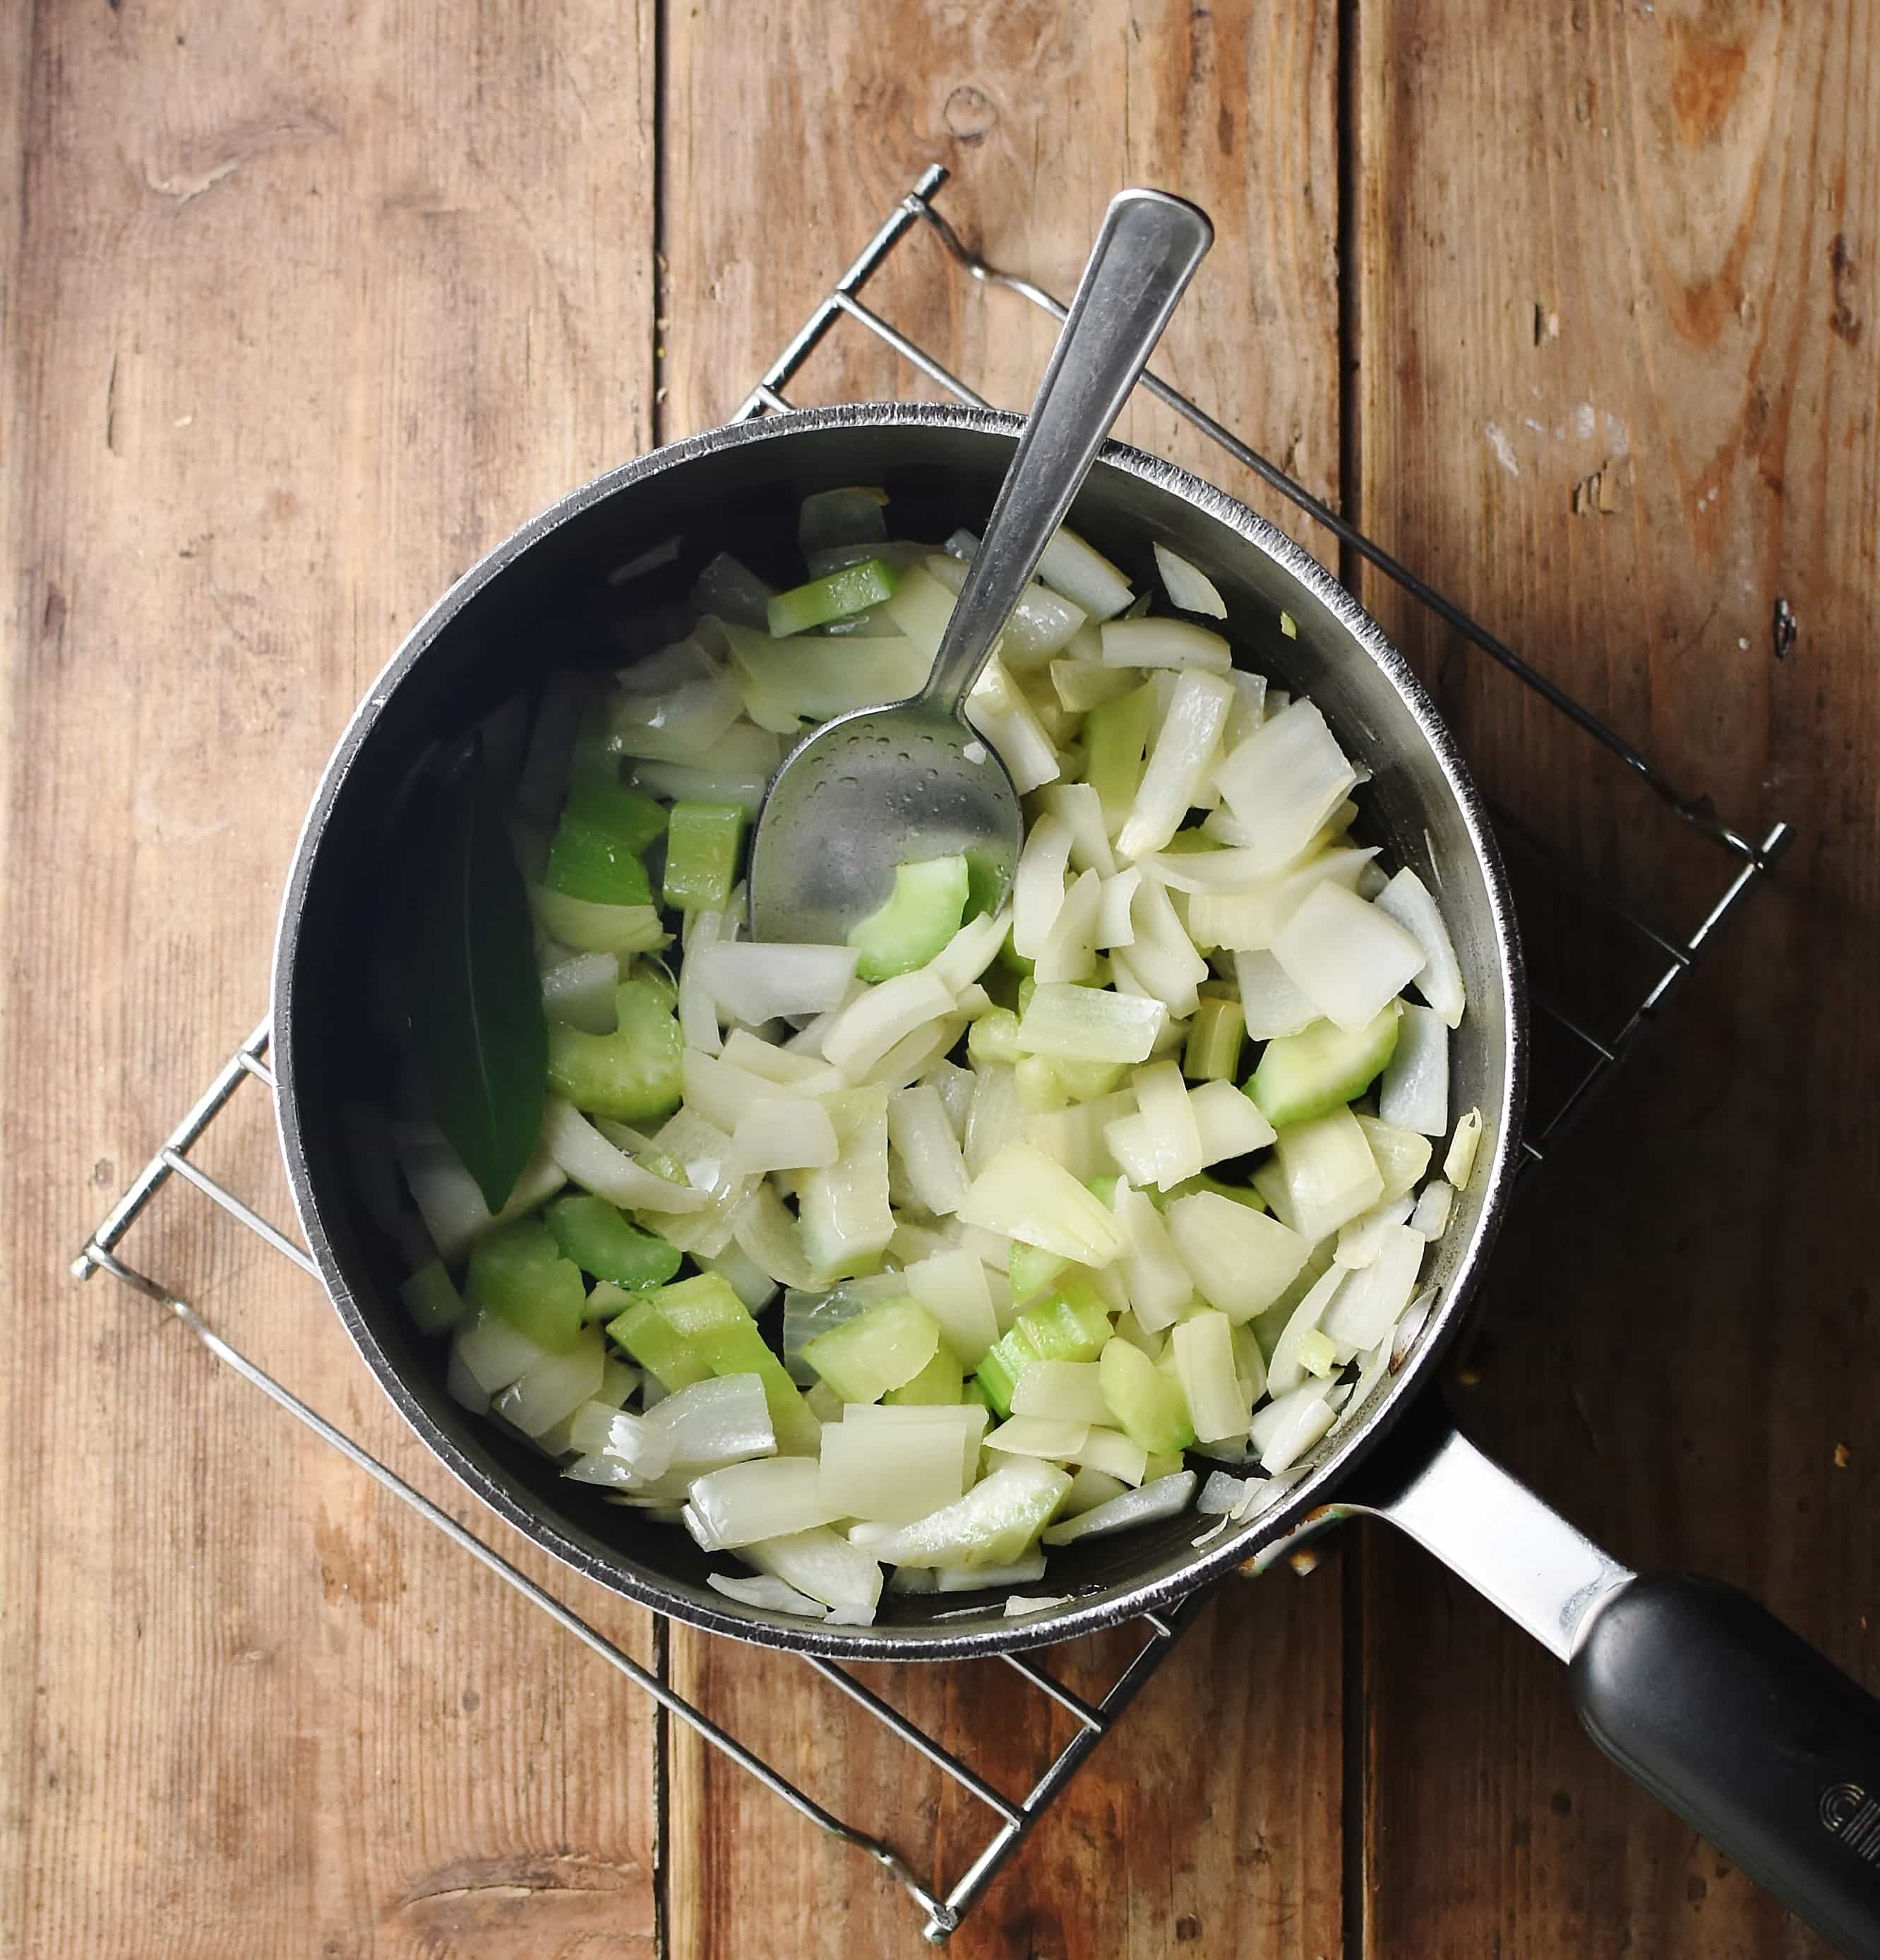 Chopped onion and celery in large pot with spoon.